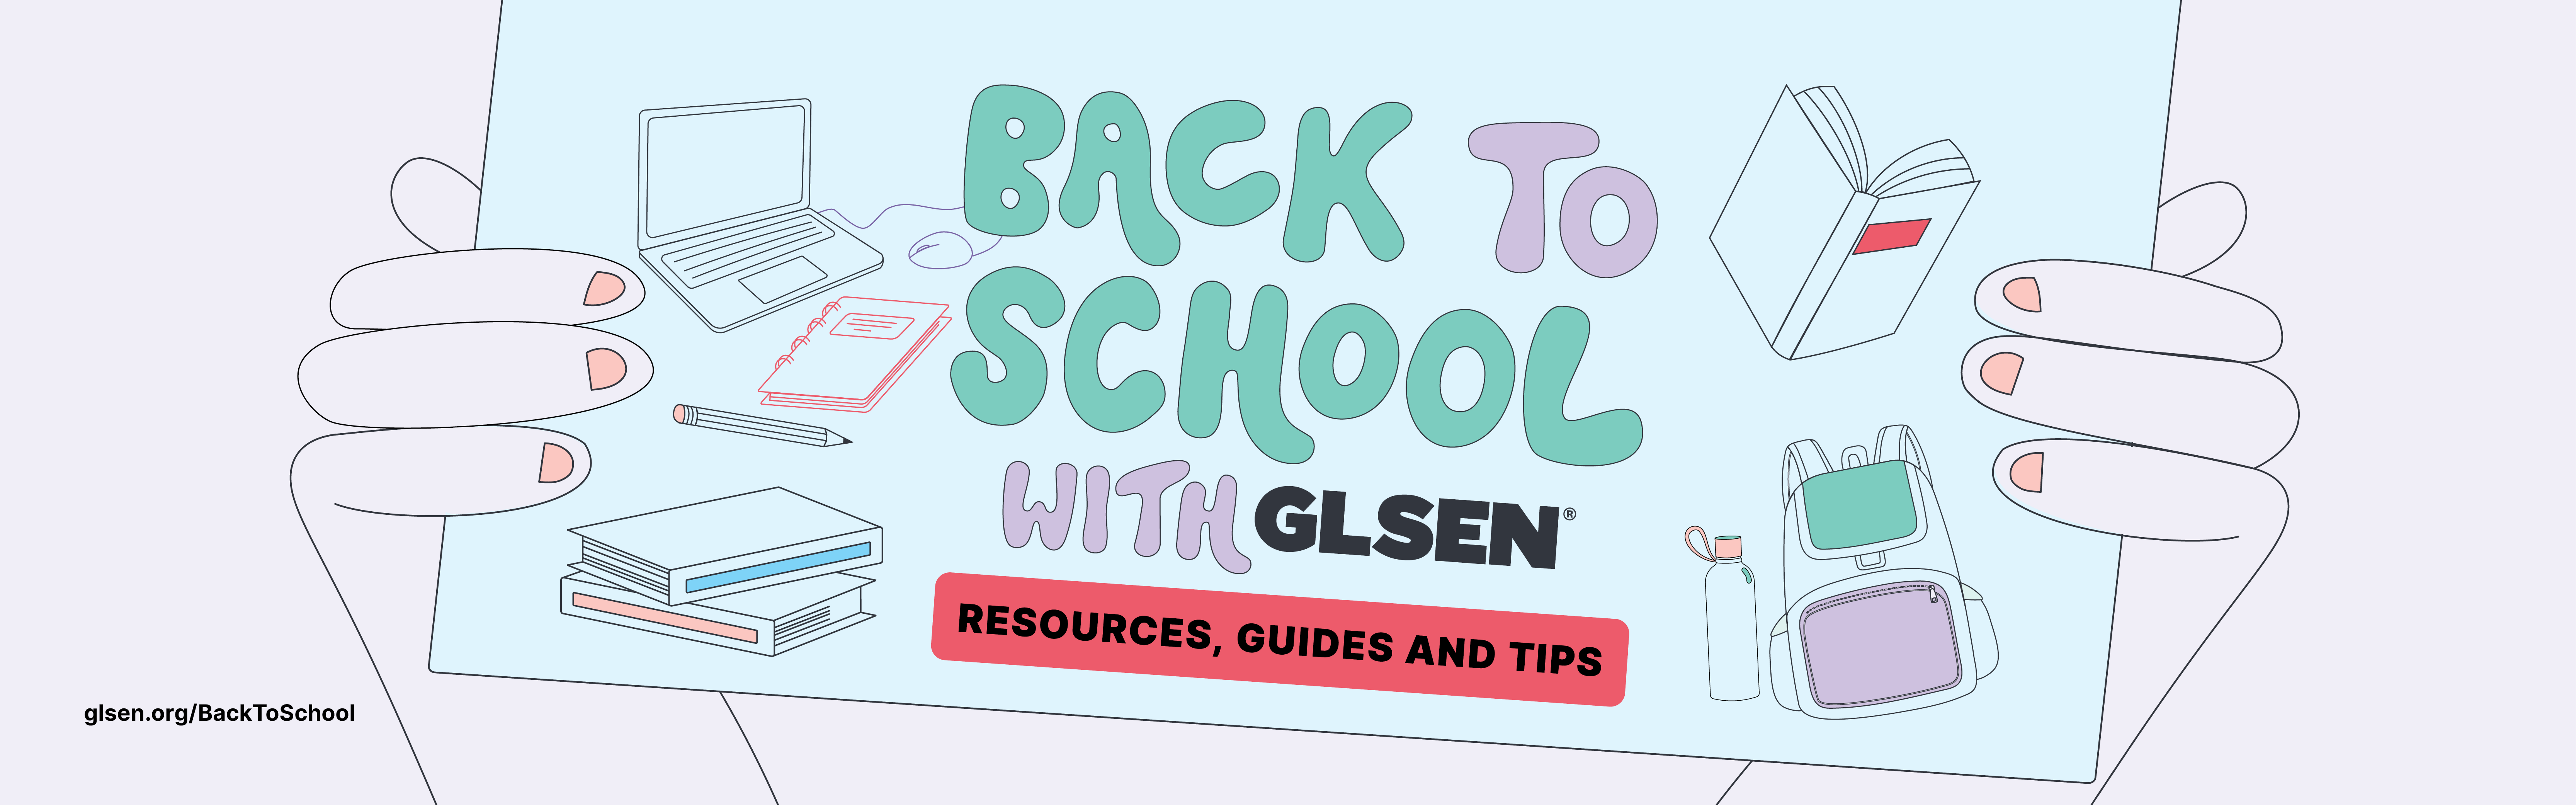 Back to School with GLSEN 